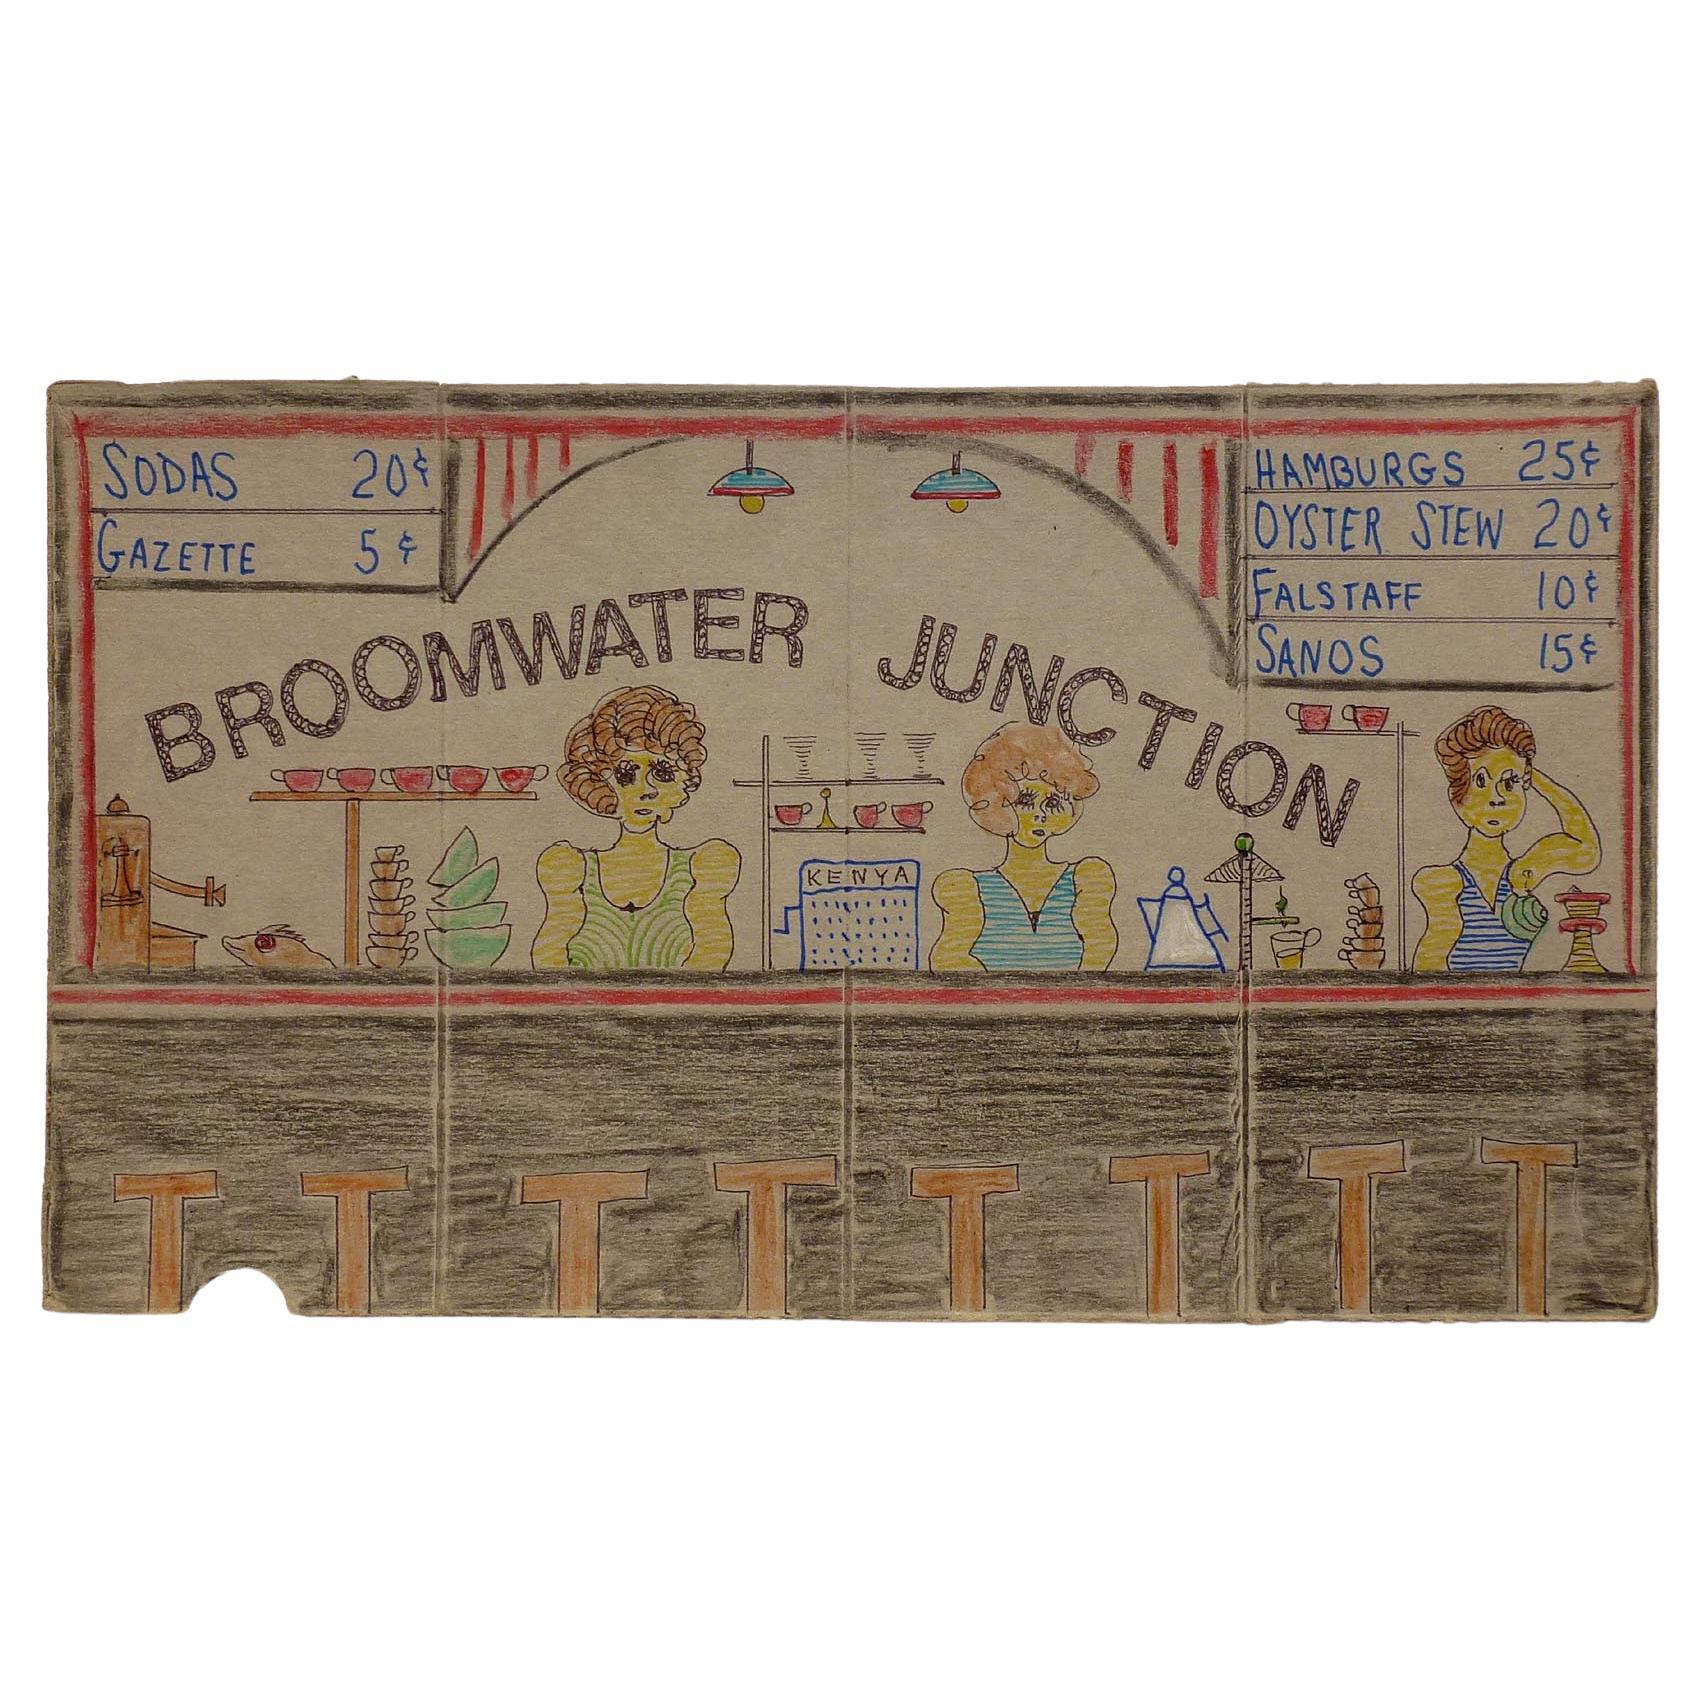 "Broomwater Junction" Diner on Cracker Box by the Outsider Artist Lewis Smith For Sale